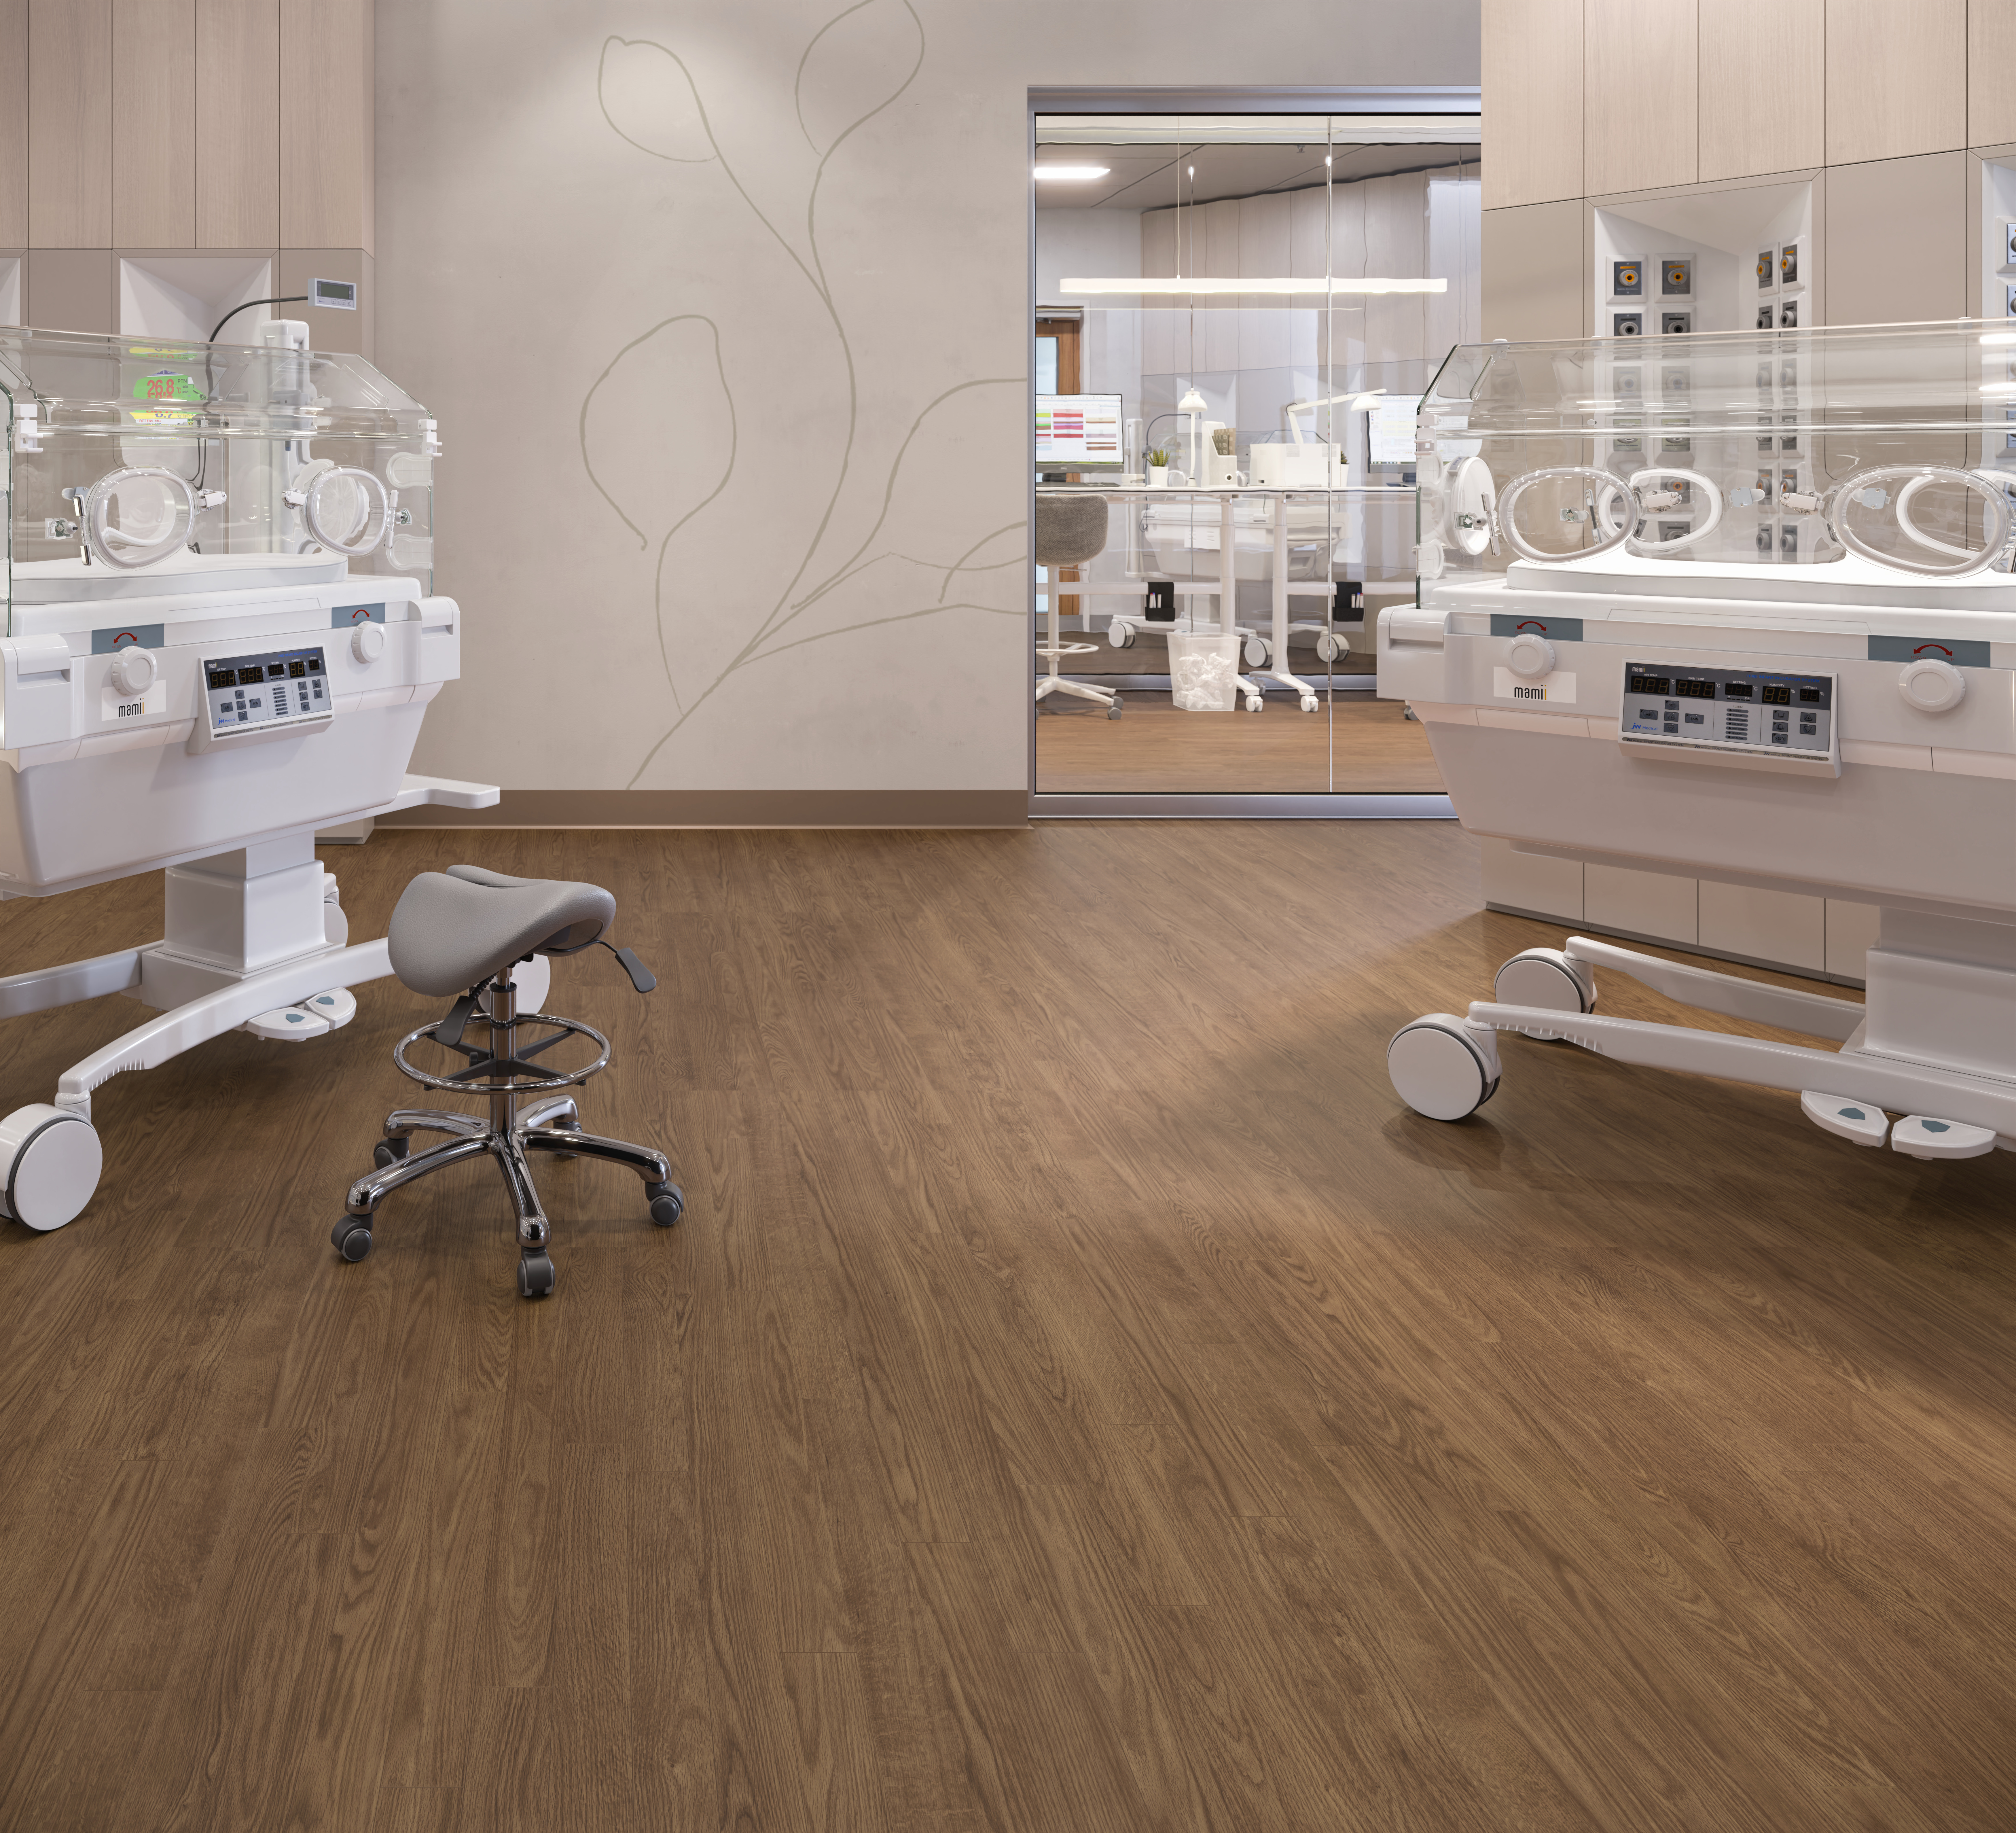 A resilient heterogeneous sheet collection developed specifically for healthcare designers, facility managers, staff and patients, Attune offers exceptional aesthetics, acoustics, comfort and durability, essential elements needed for today’s modern healthcare facilities